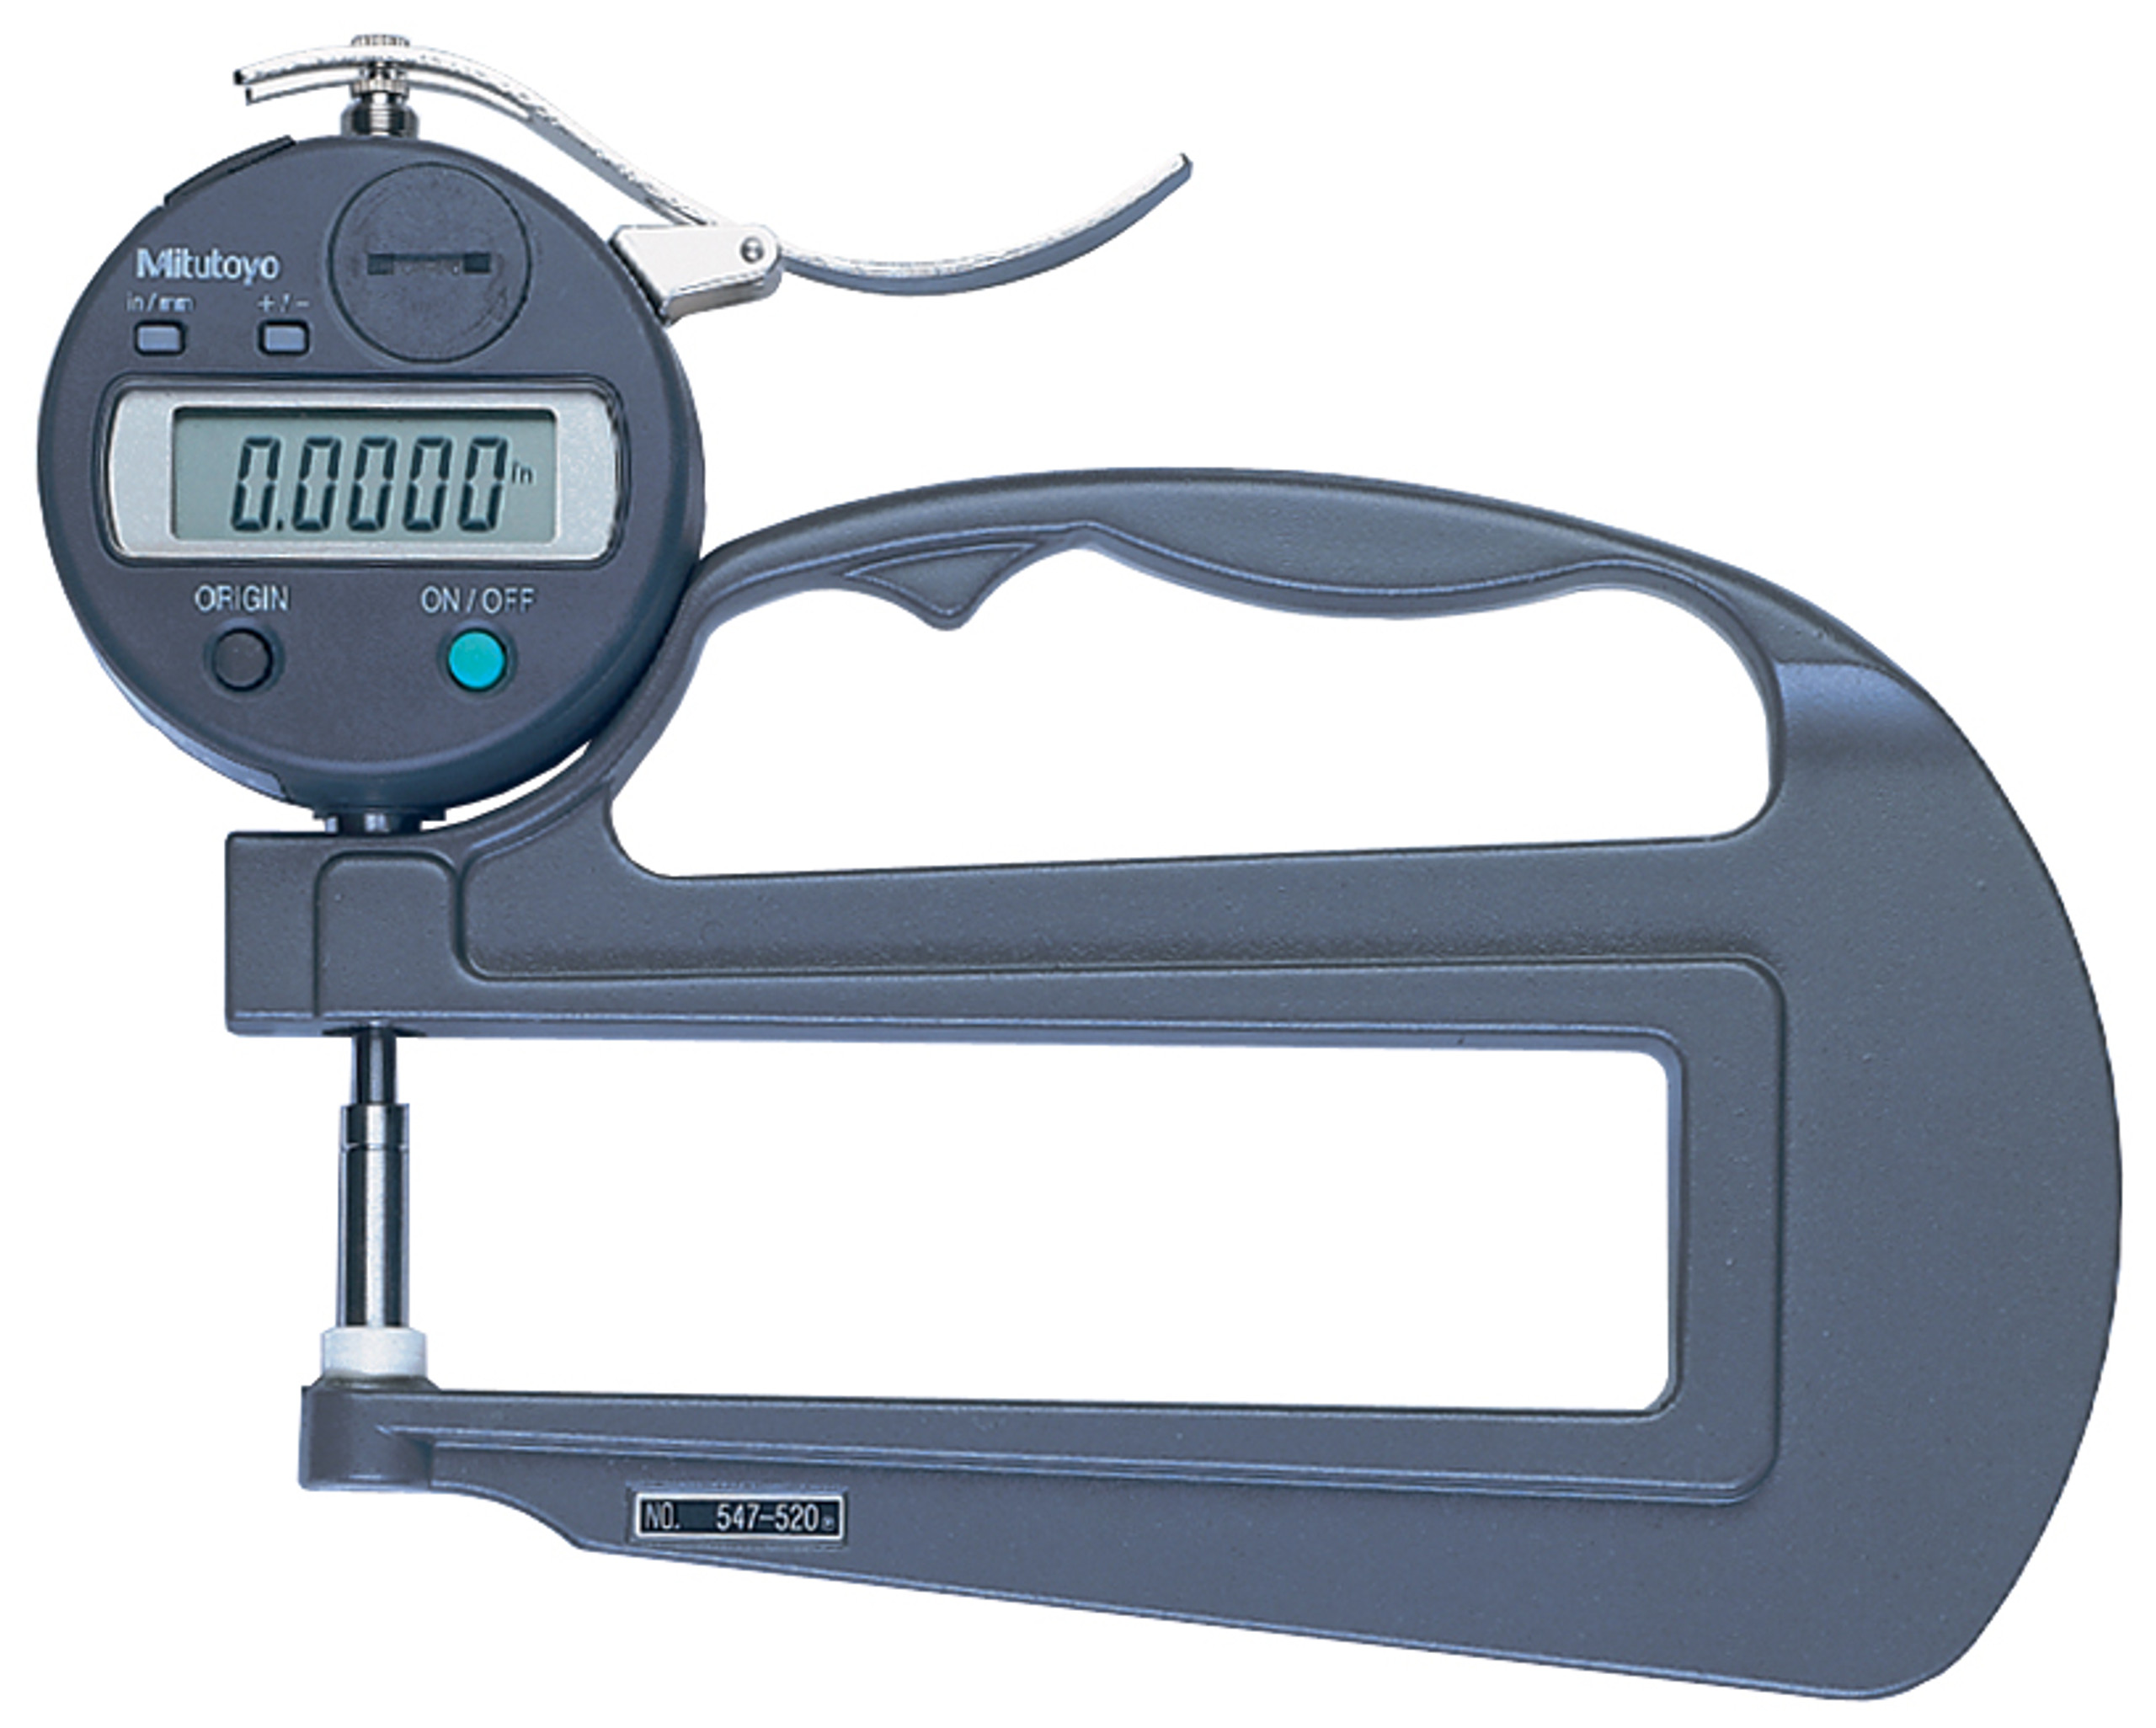 Mitutoyo 547 520s Ids Digimatic Thickness Gage With Spc Output